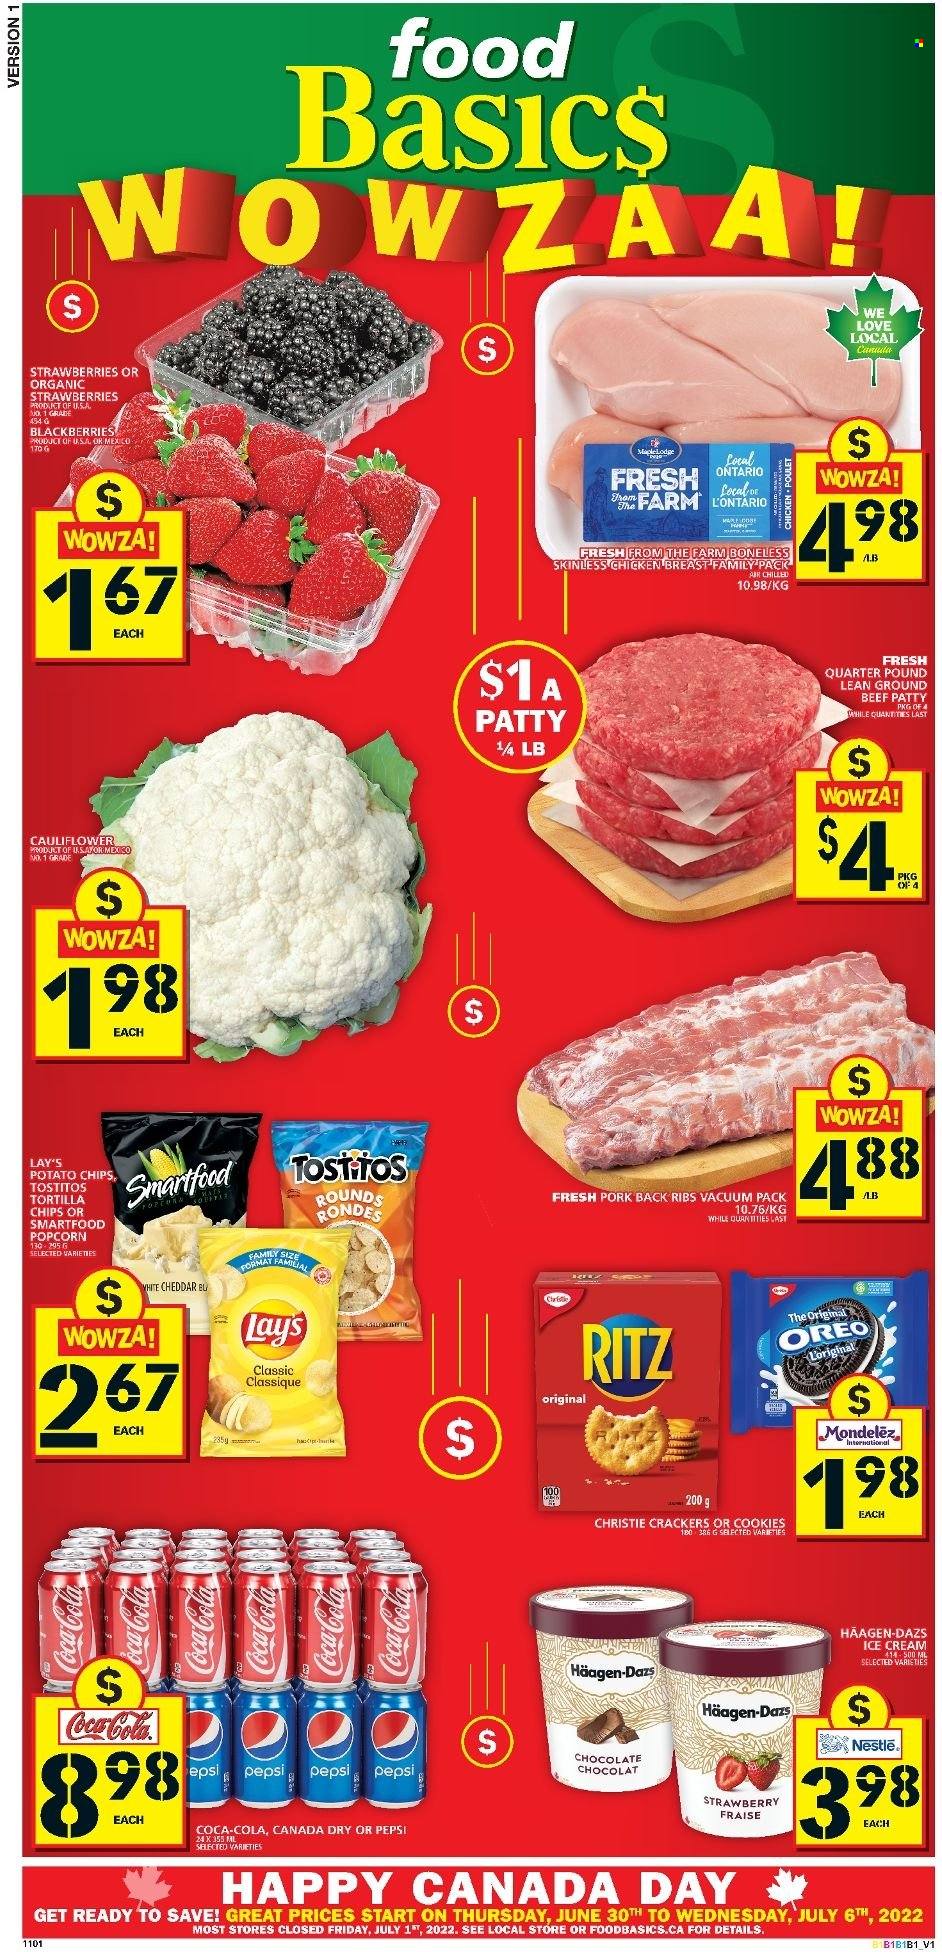 thumbnail - Food Basics Flyer - June 30, 2022 - July 06, 2022 - Sales products - blackberries, strawberries, cheese, ice cream, Häagen-Dazs, cookies, RITZ, tortilla chips, potato chips, chips, Lay’s, Smartfood, popcorn, Tostitos, Canada Dry, Coca-Cola, Pepsi, chicken breasts, chicken, beef meat, ground beef, pork meat, pork ribs, pork back ribs, Nestlé, Oreo. Page 1.